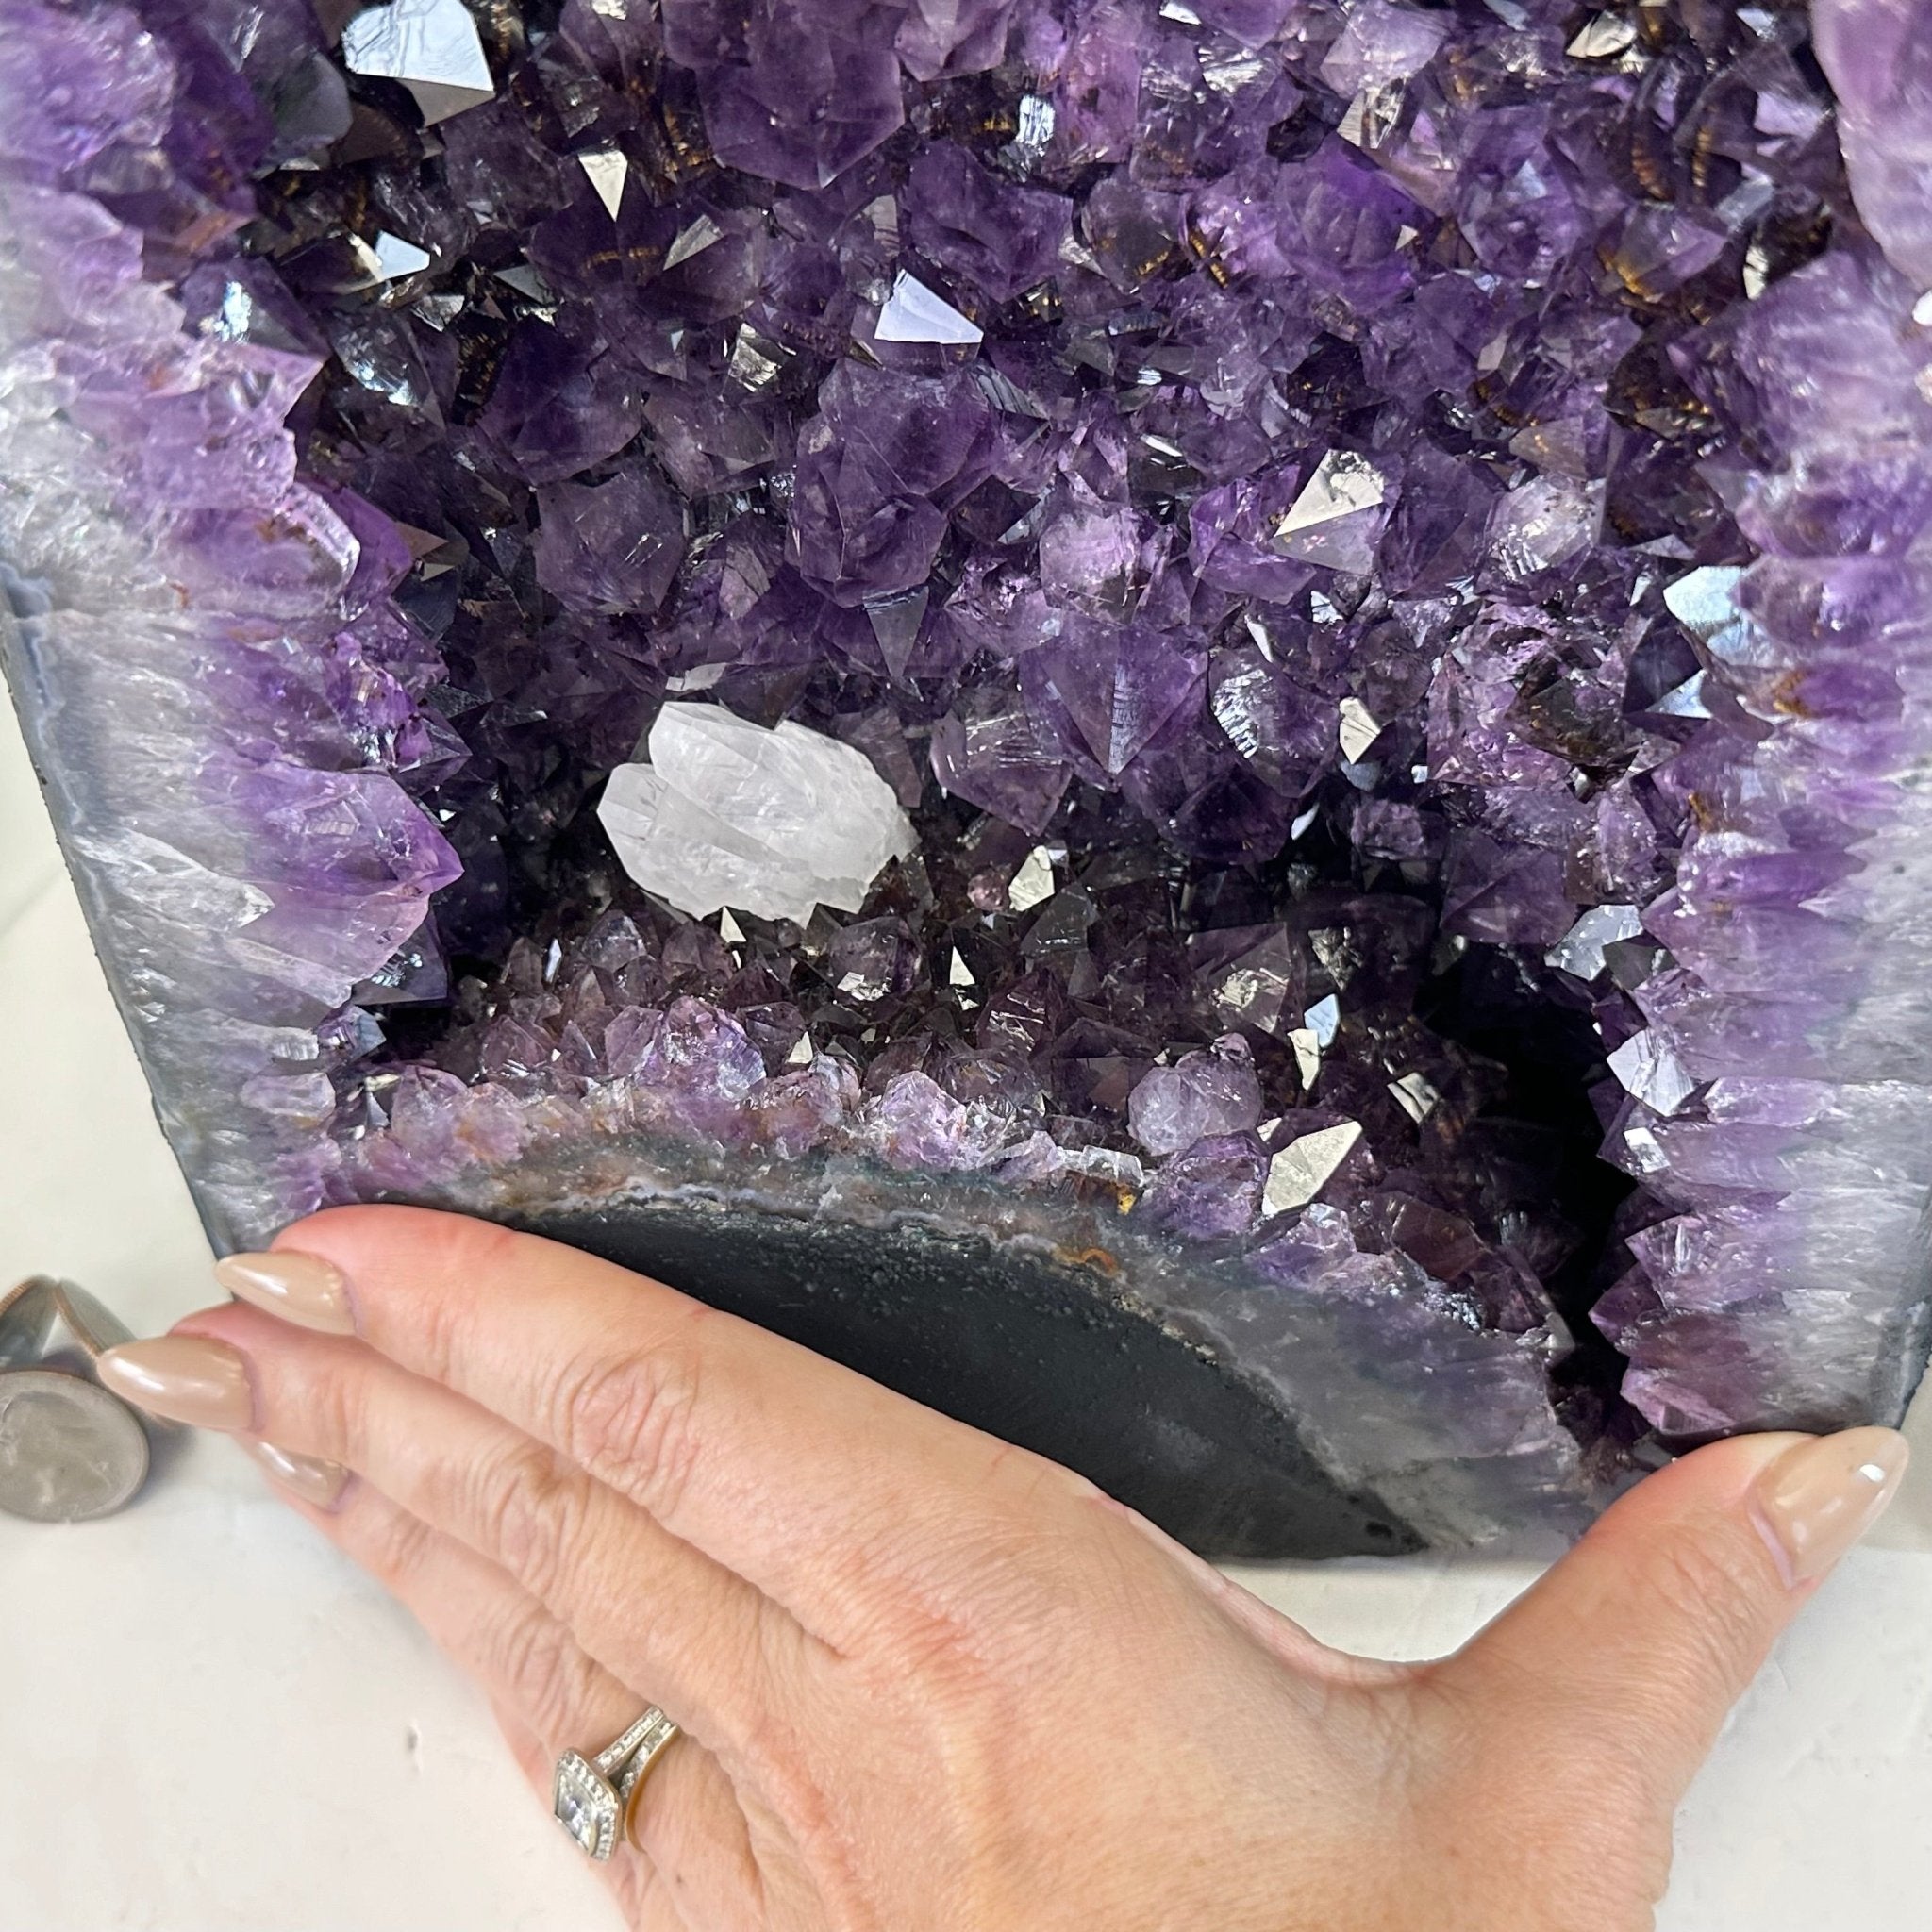 Quality Brazilian Amethyst Cathedral, 25.6 lbs & 17.9" Tall, #5601 - 1397 - Brazil GemsBrazil GemsQuality Brazilian Amethyst Cathedral, 25.6 lbs & 17.9" Tall, #5601 - 1397Cathedrals5601 - 1397